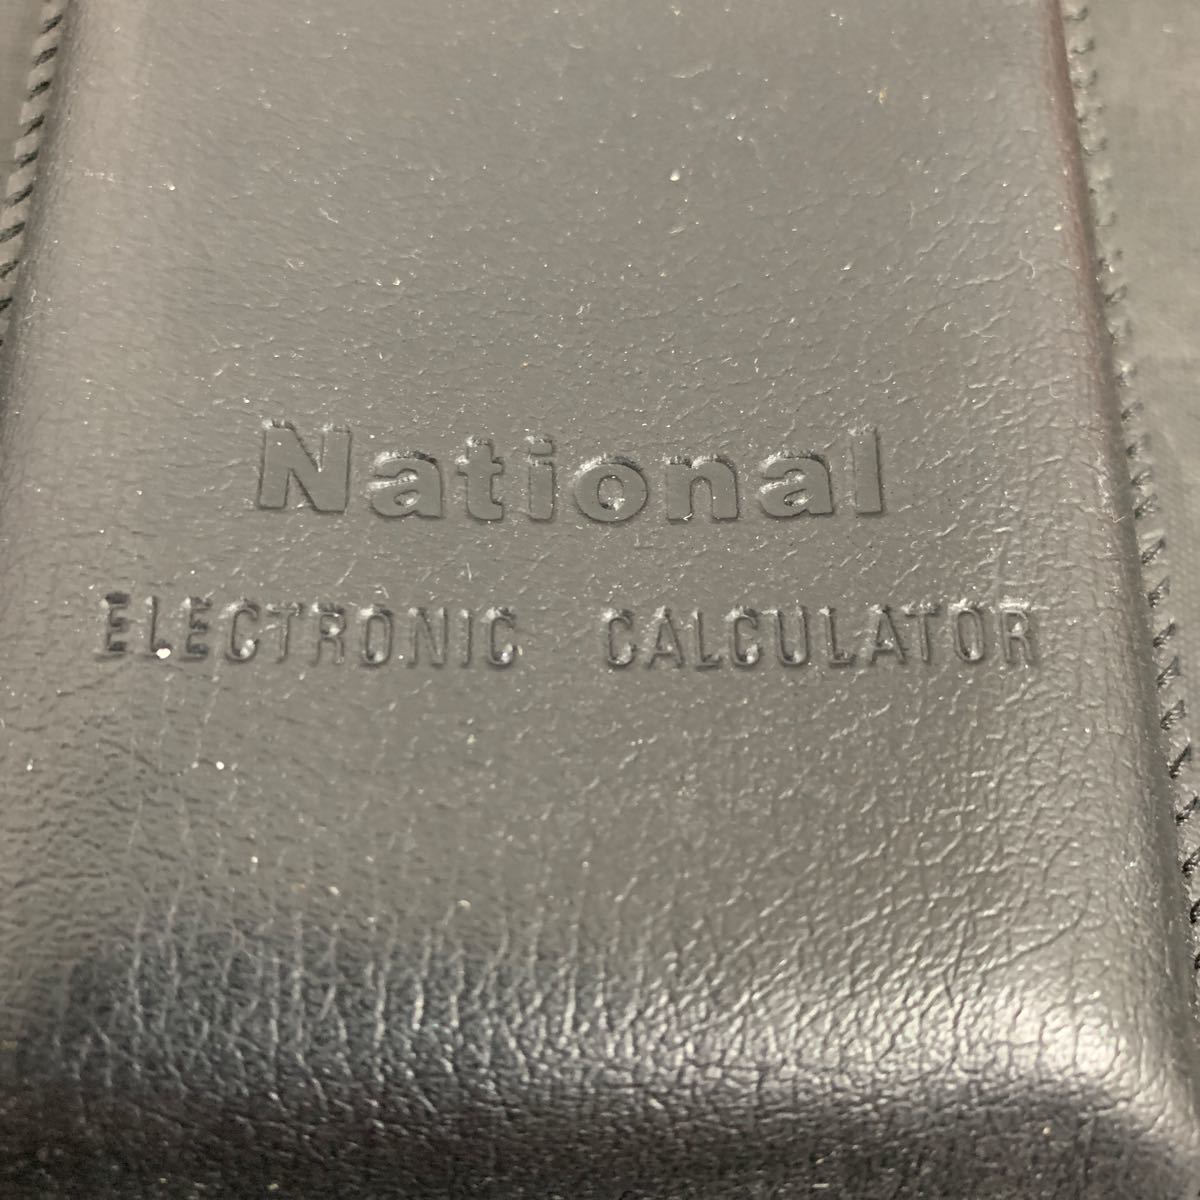 National National electron Solo van Panac8006 JE-8006 body owner manual case calculator count machine K2841